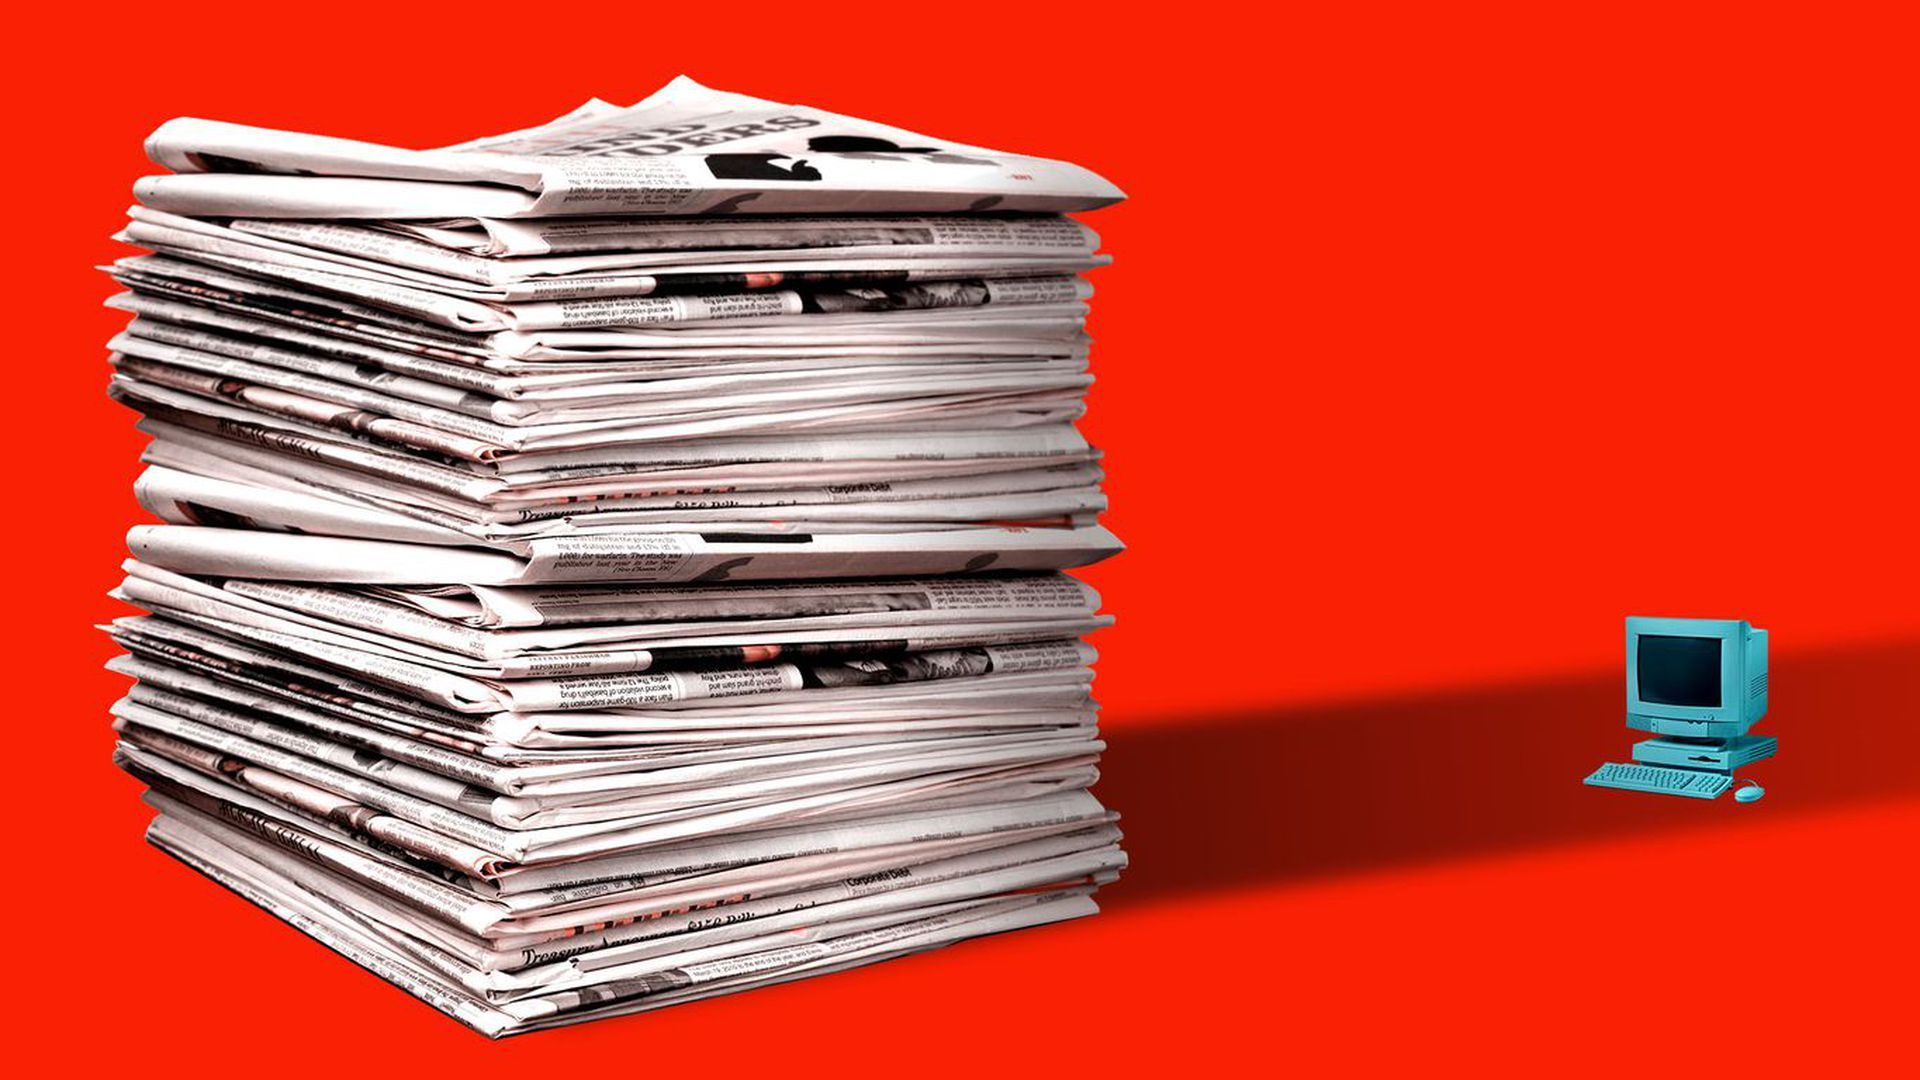 Illustration of giant stack of newspapers casting a shadow on a small computer.